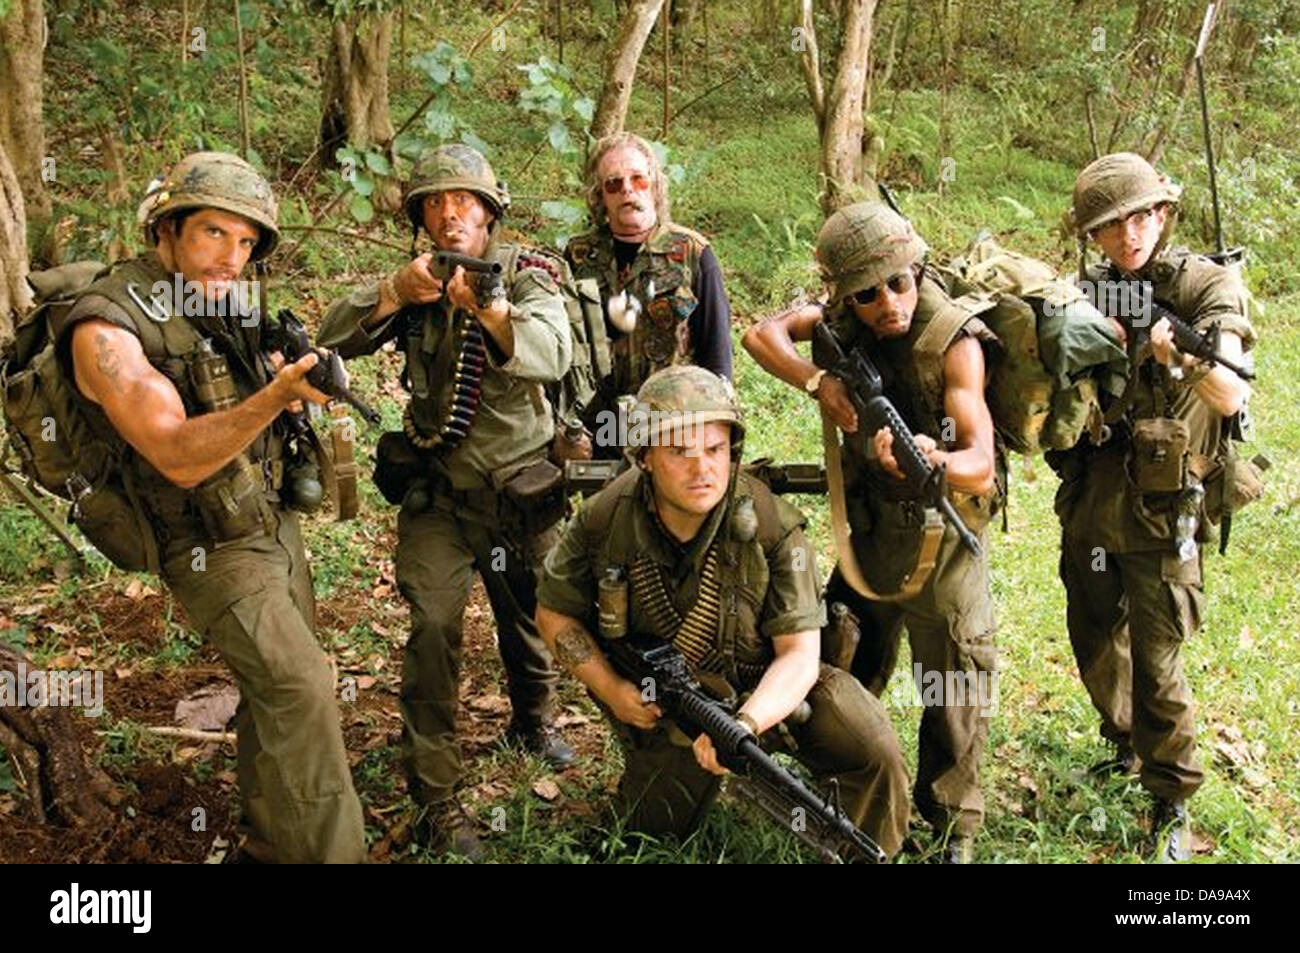 Tropic Thunder Film High Resolution Stock Photography and Images - Alamy